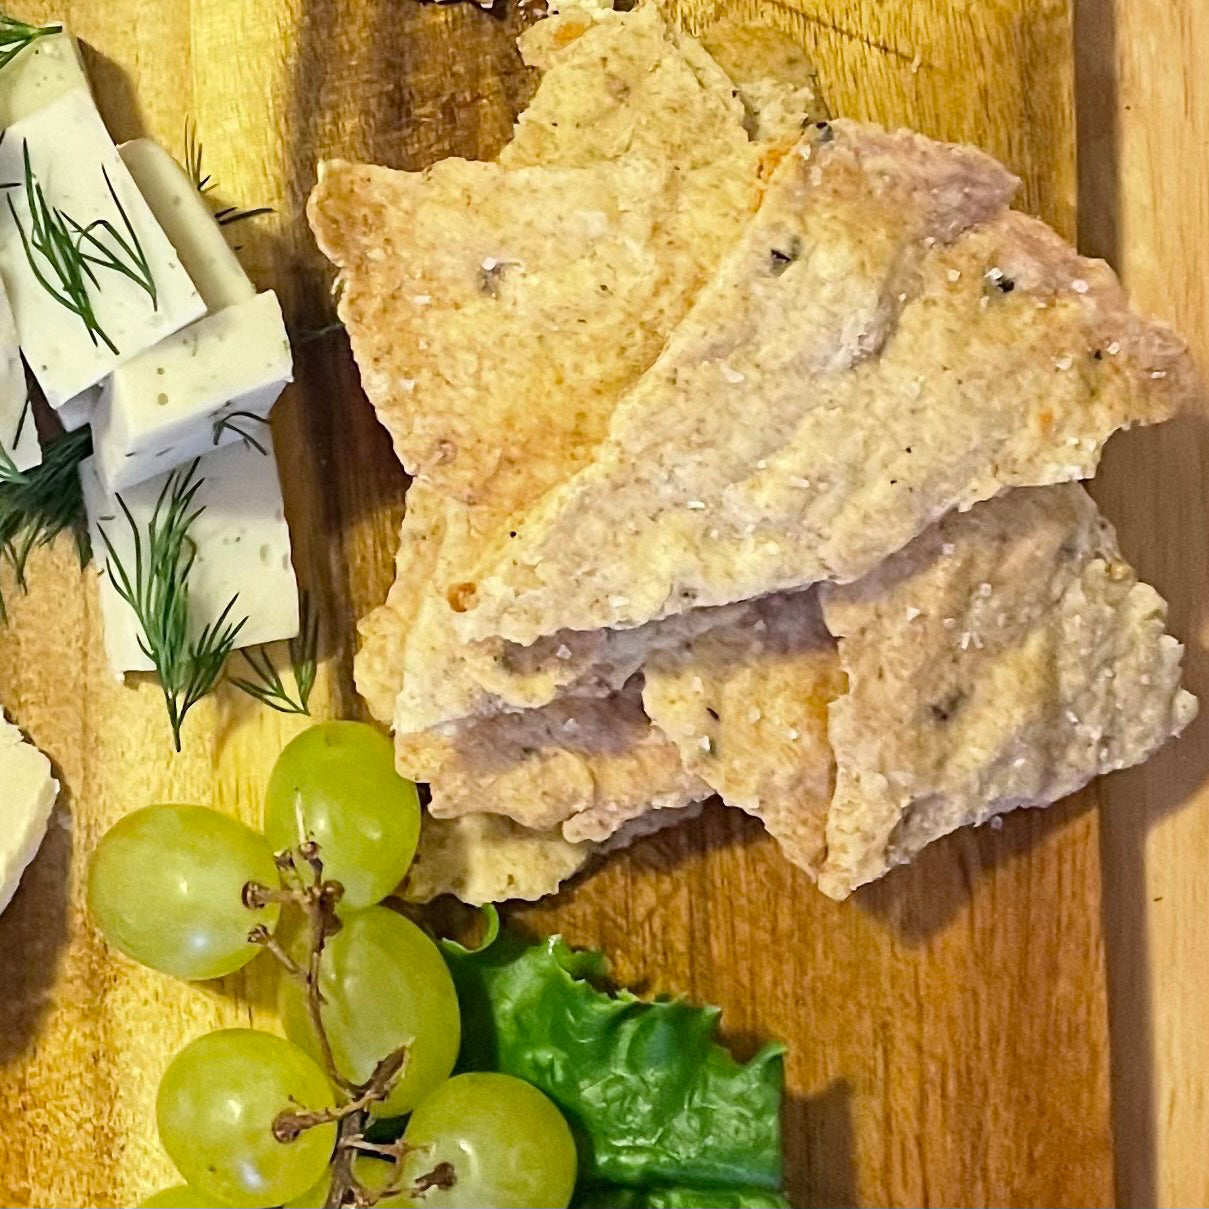 Handmade whole wheat crackers for your vegan charcuterie board. Made in Philly. Small batch.